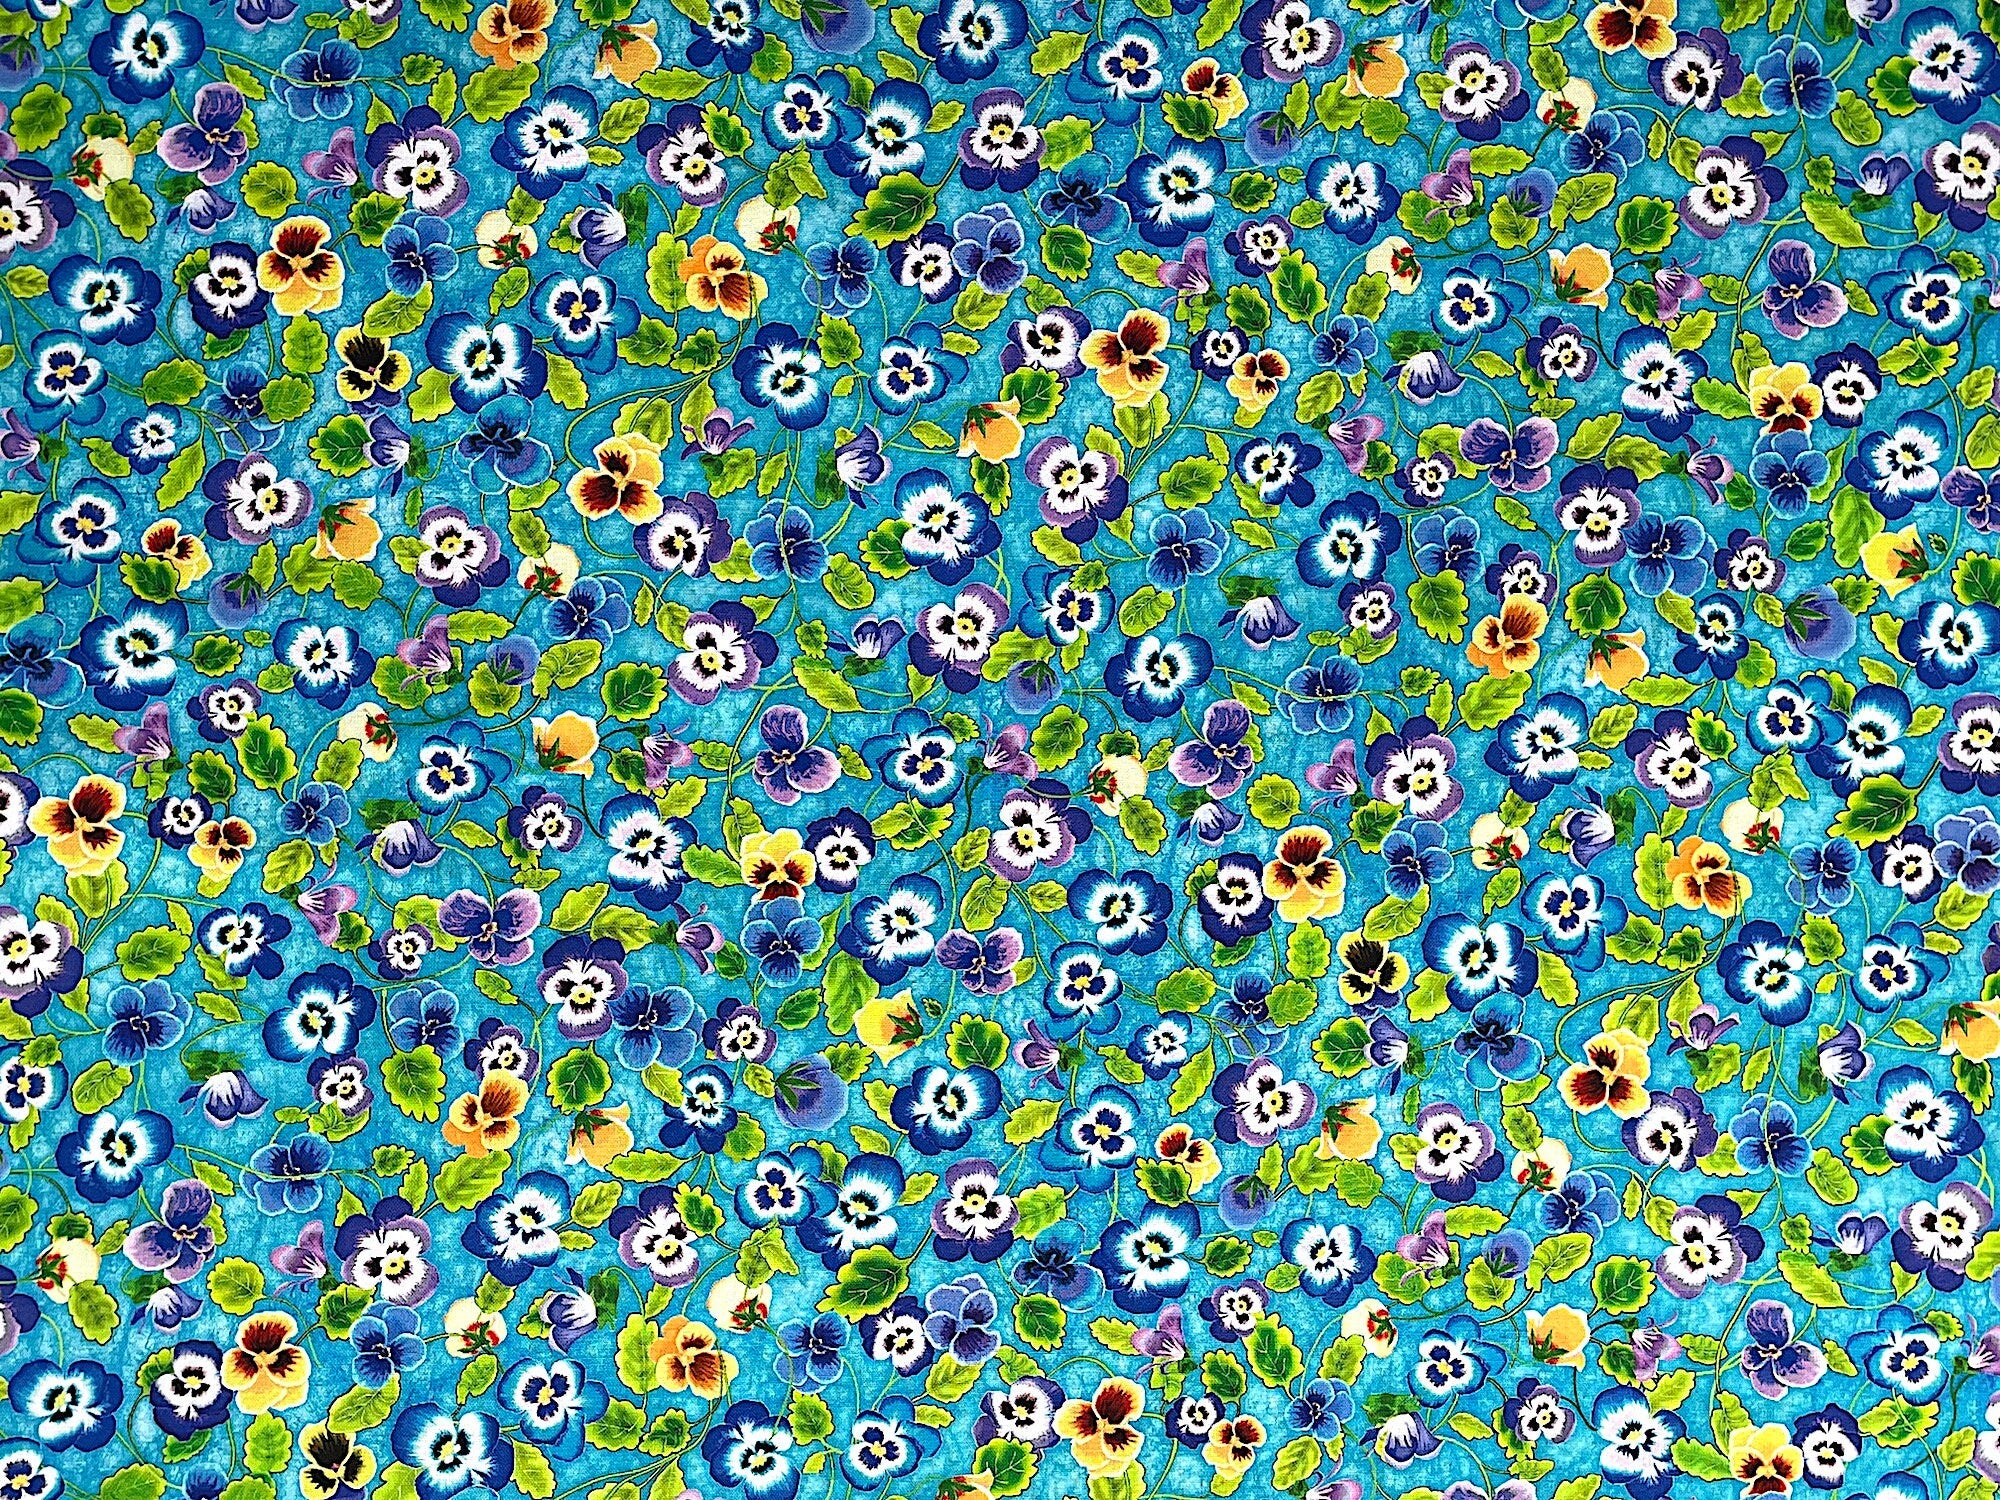 Teal cotton fabric covered with yellow, blue and purple pansies and green leaves.